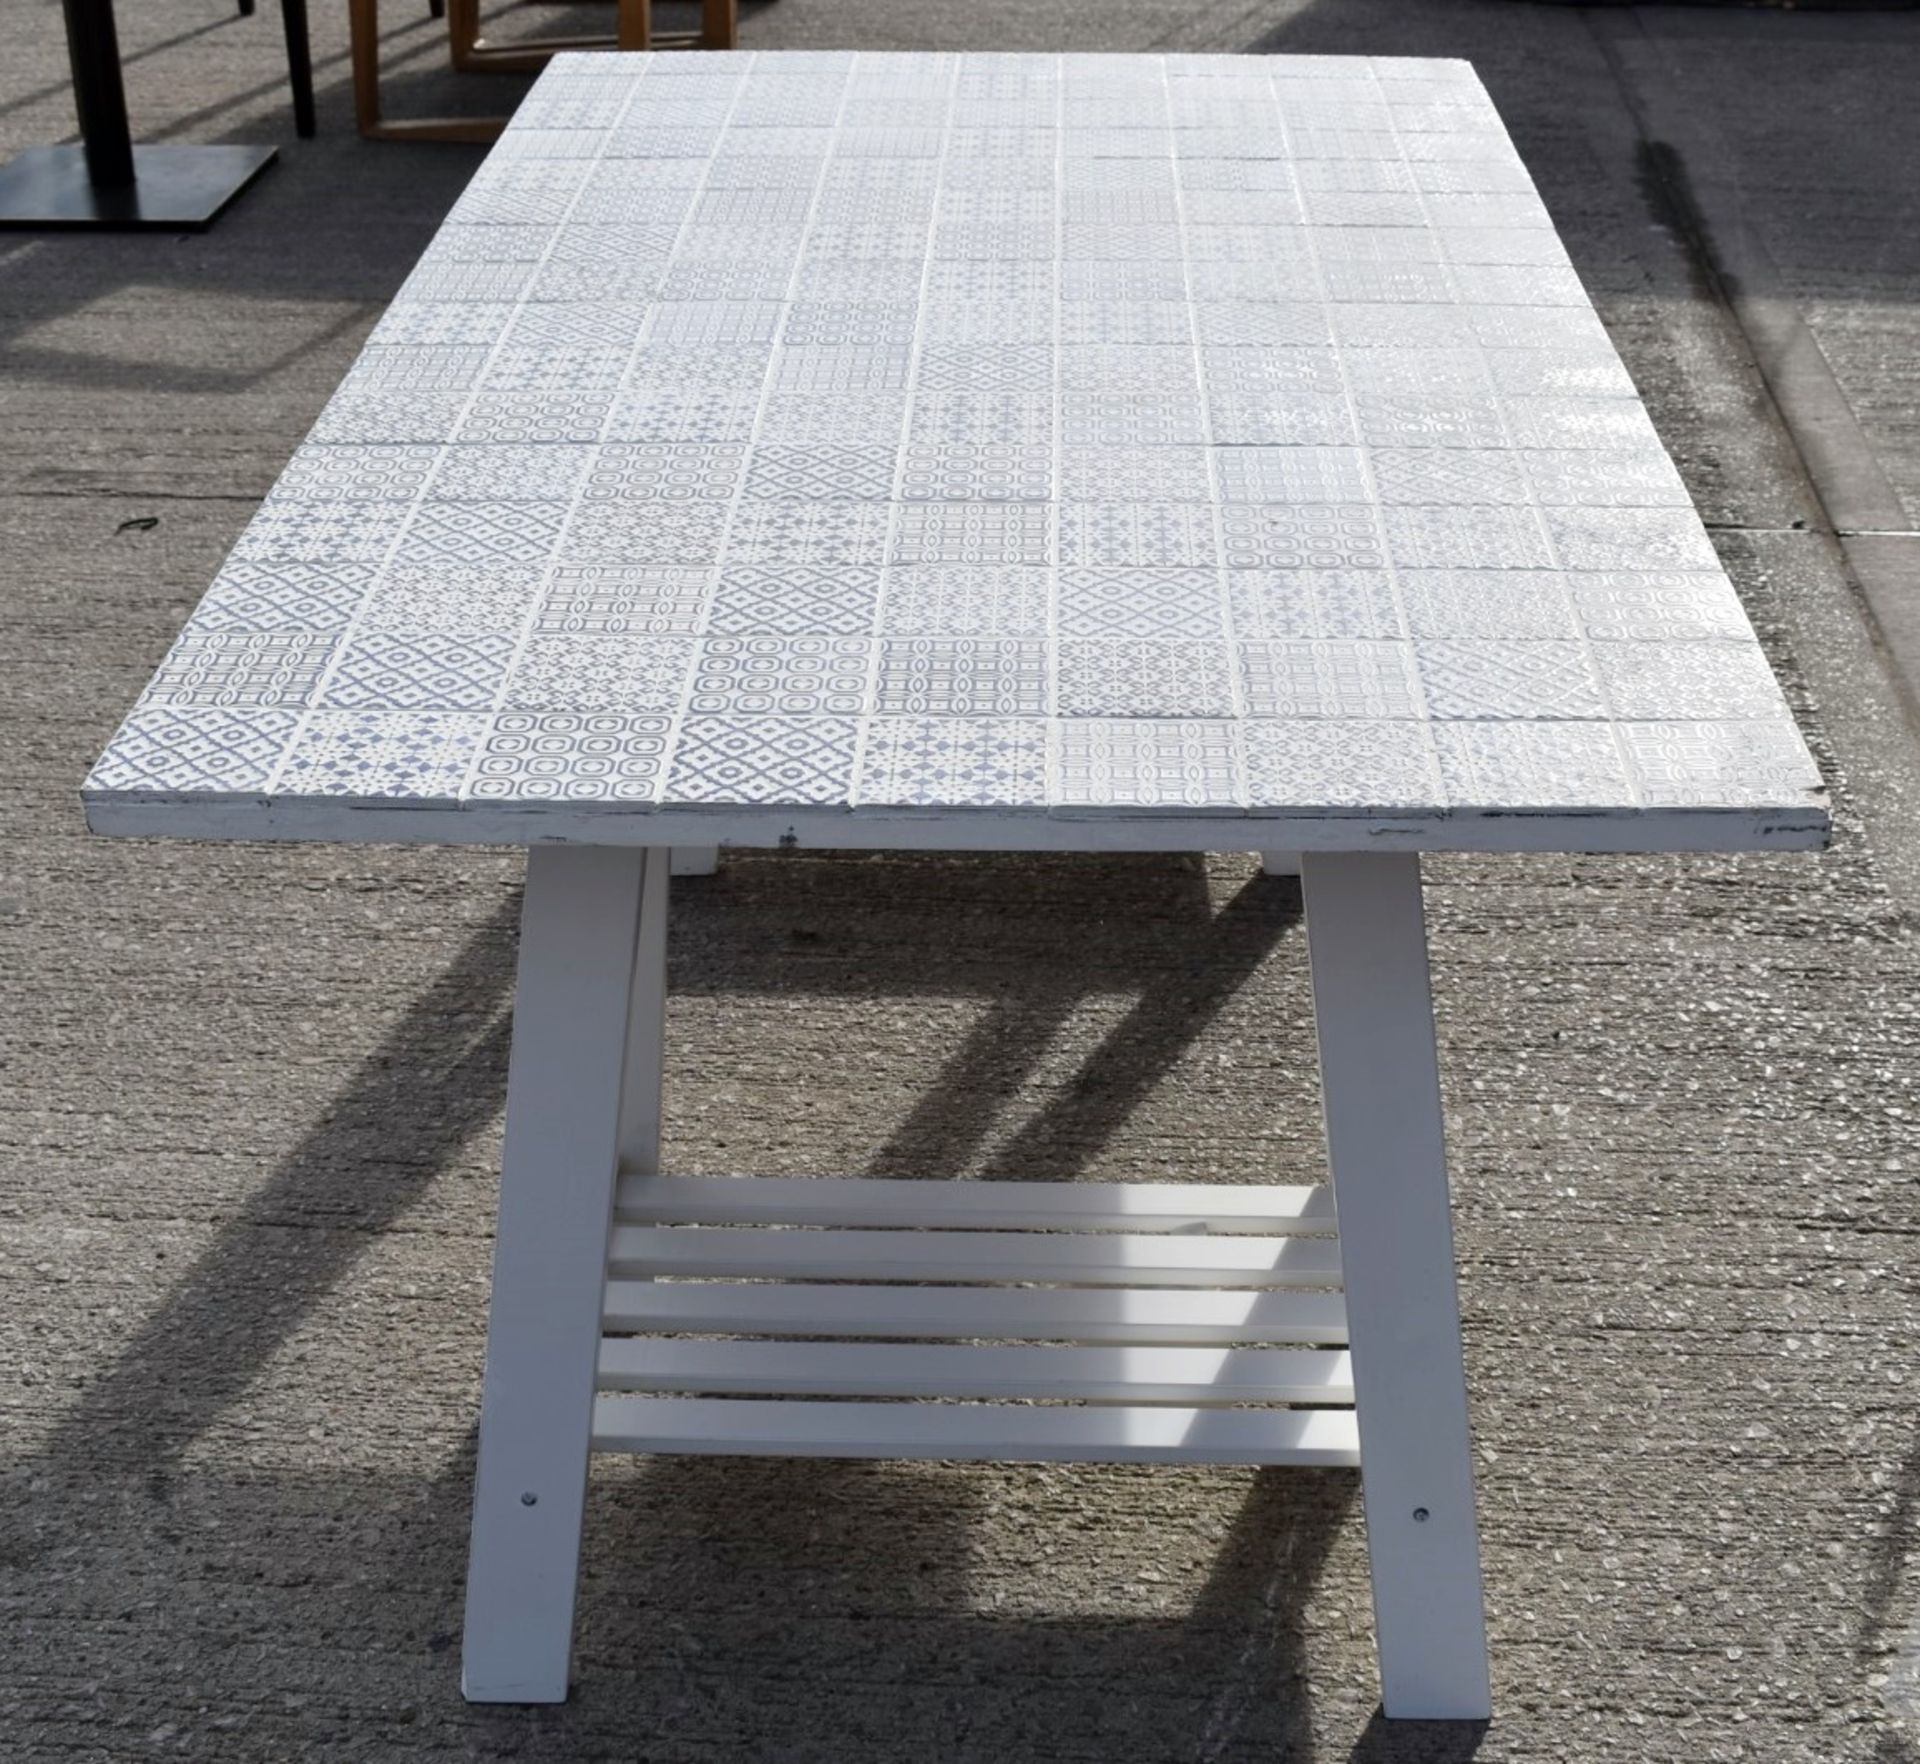 1 x Bespoke Tiled Topped Table With 3 x Tiled Plinths - Department Store Display Prop - Ref: - Image 5 of 8